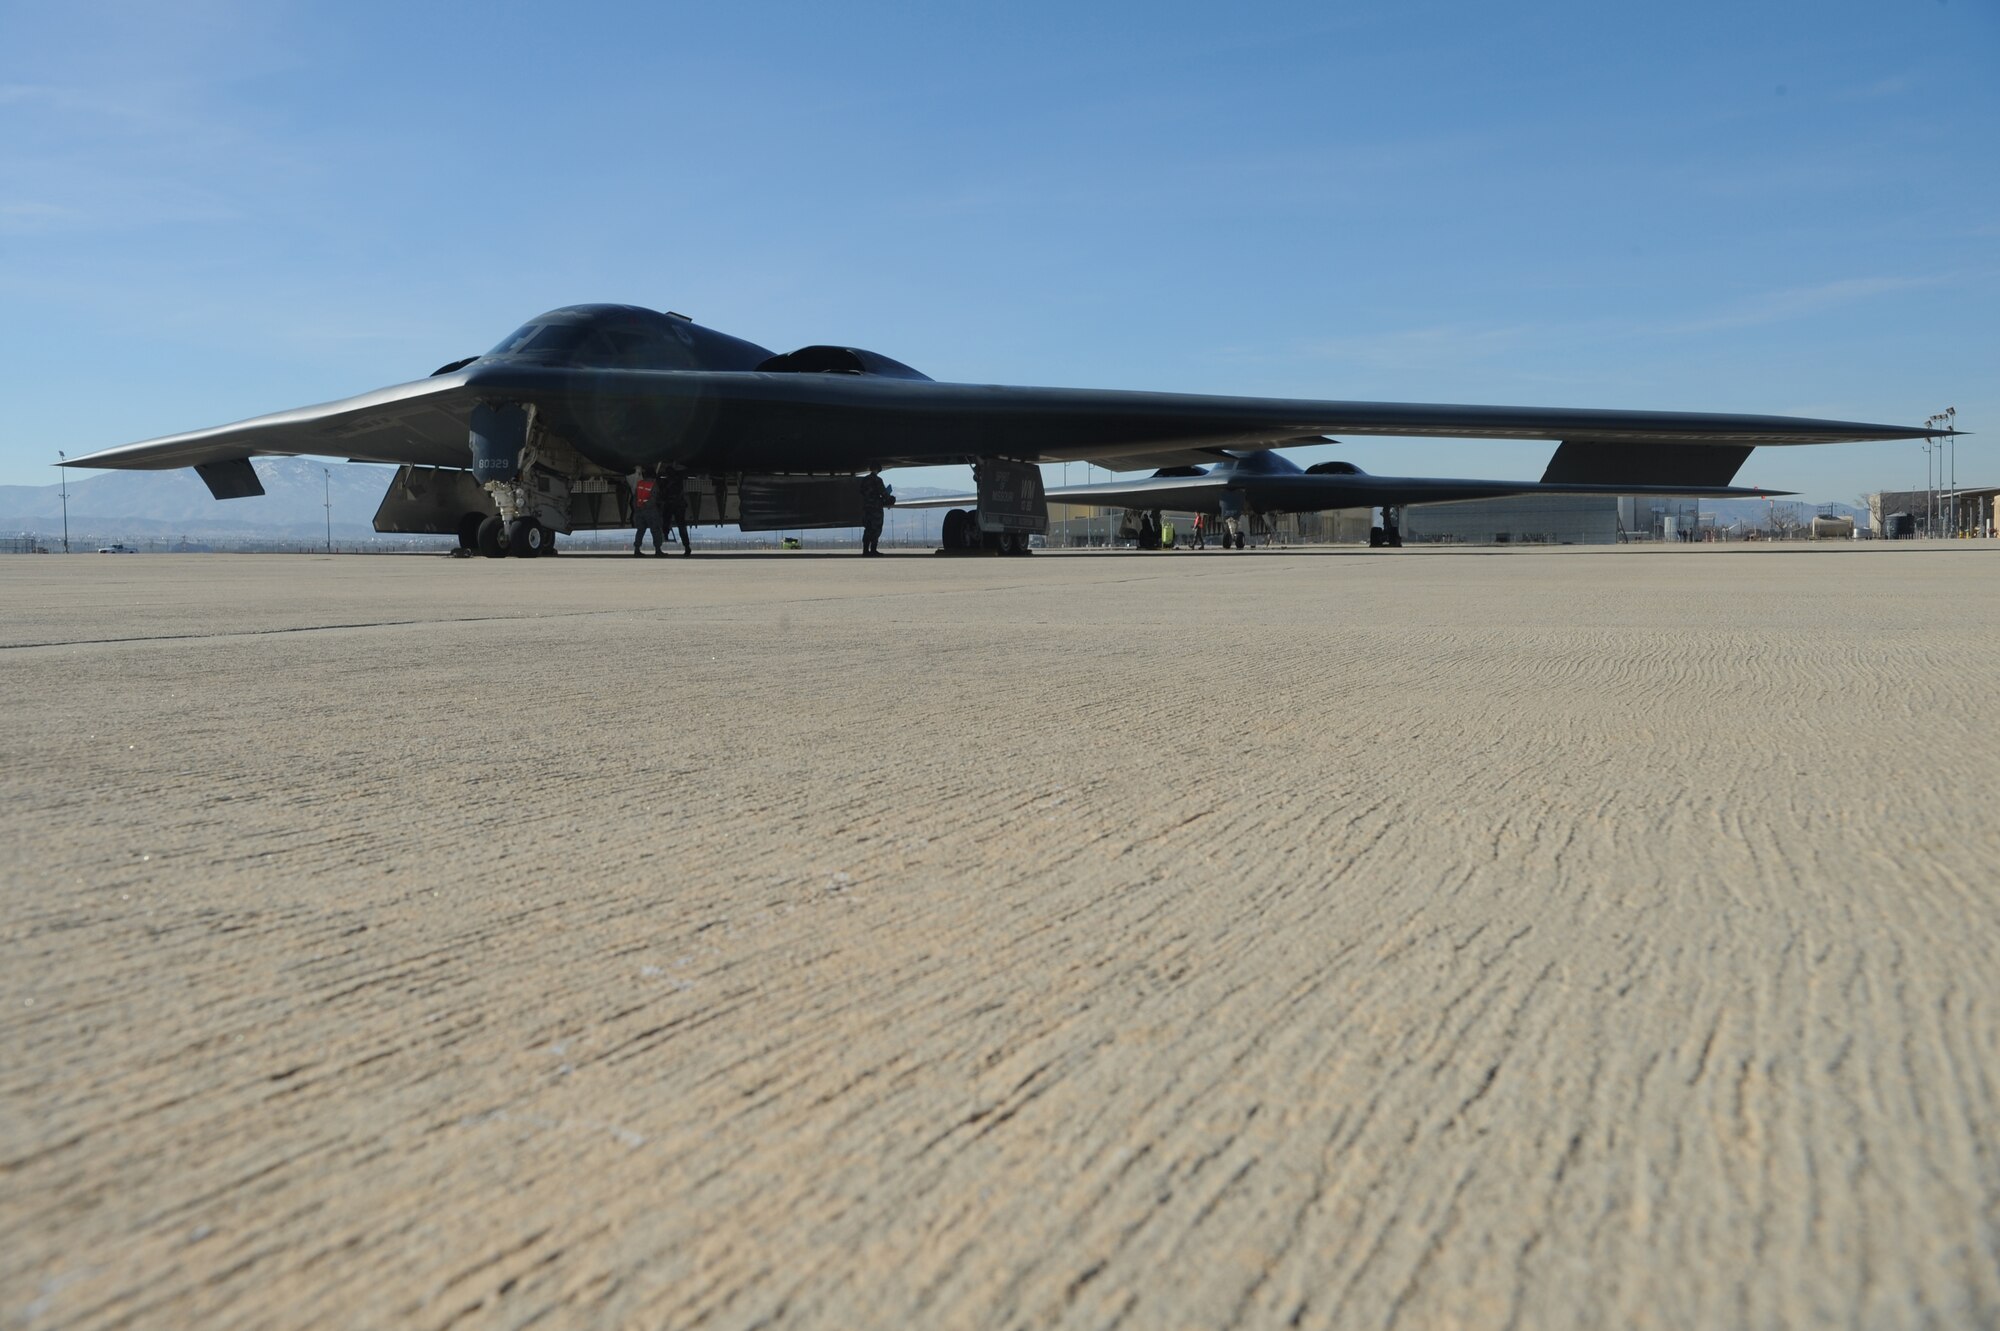 A B-2 bomber sits at Northrop Grumman's Plant 42, Production Flight Test Installation in Palmdale, Calif., Dec. 31, 2008. The B-2s arrived in preparation to flyover the Rose Bowl parade and game Jan. 1, 2009. (U.S. Air Force photo/Senior Airman Jessica Snow)